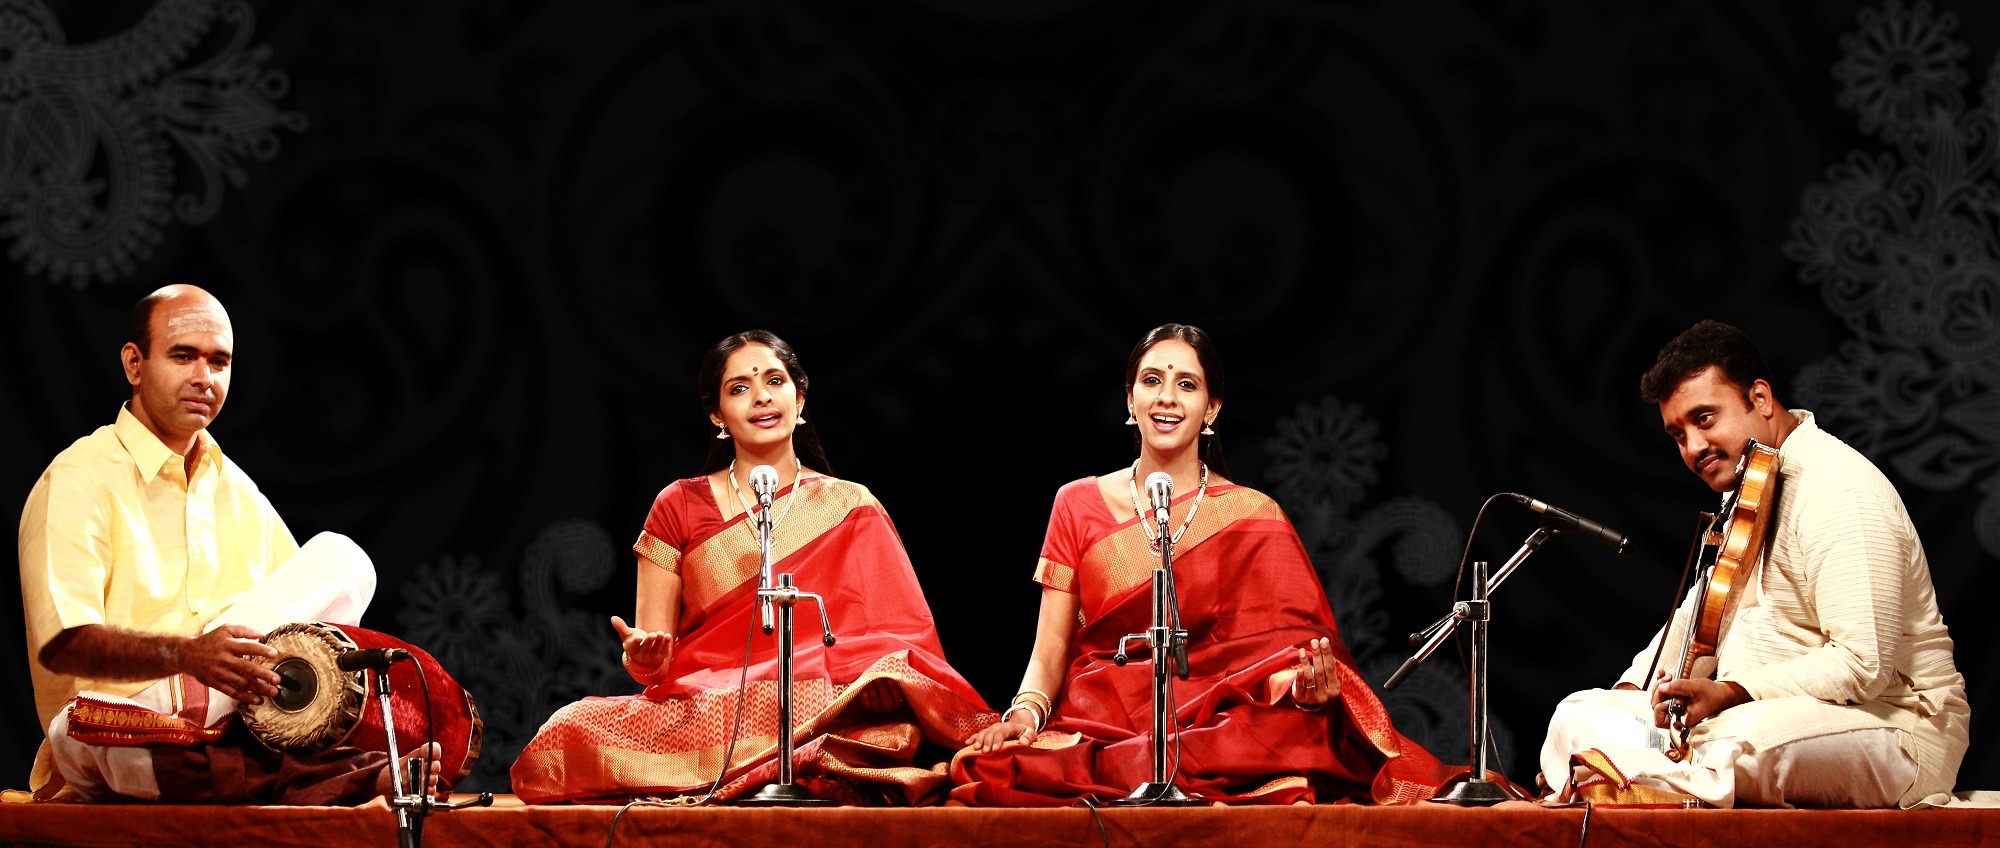 carnatic music that represents south indian traditions 